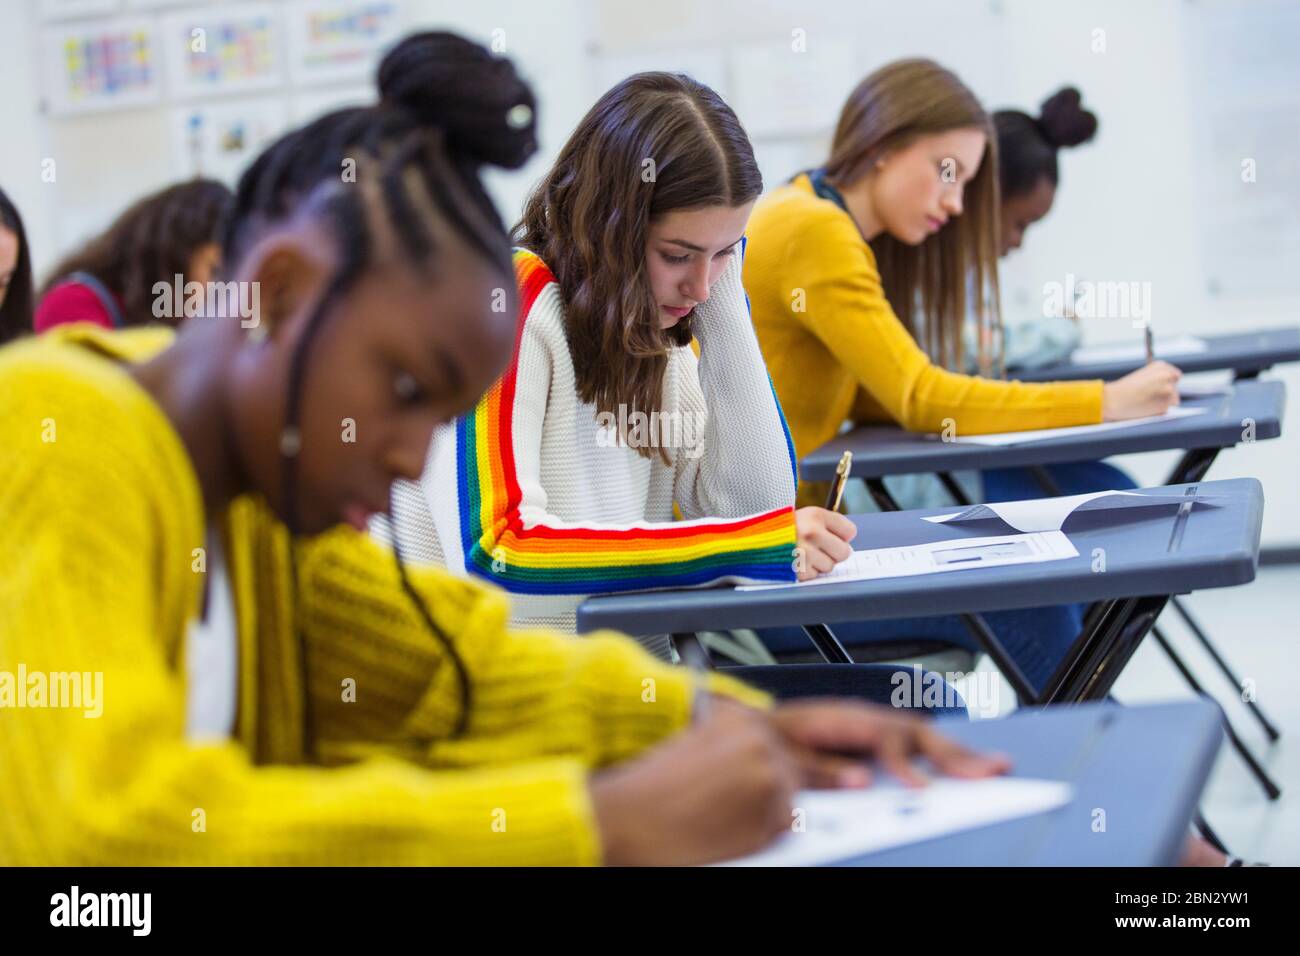 Focused high school girl students taking exam at desks in classroom Stock Photo